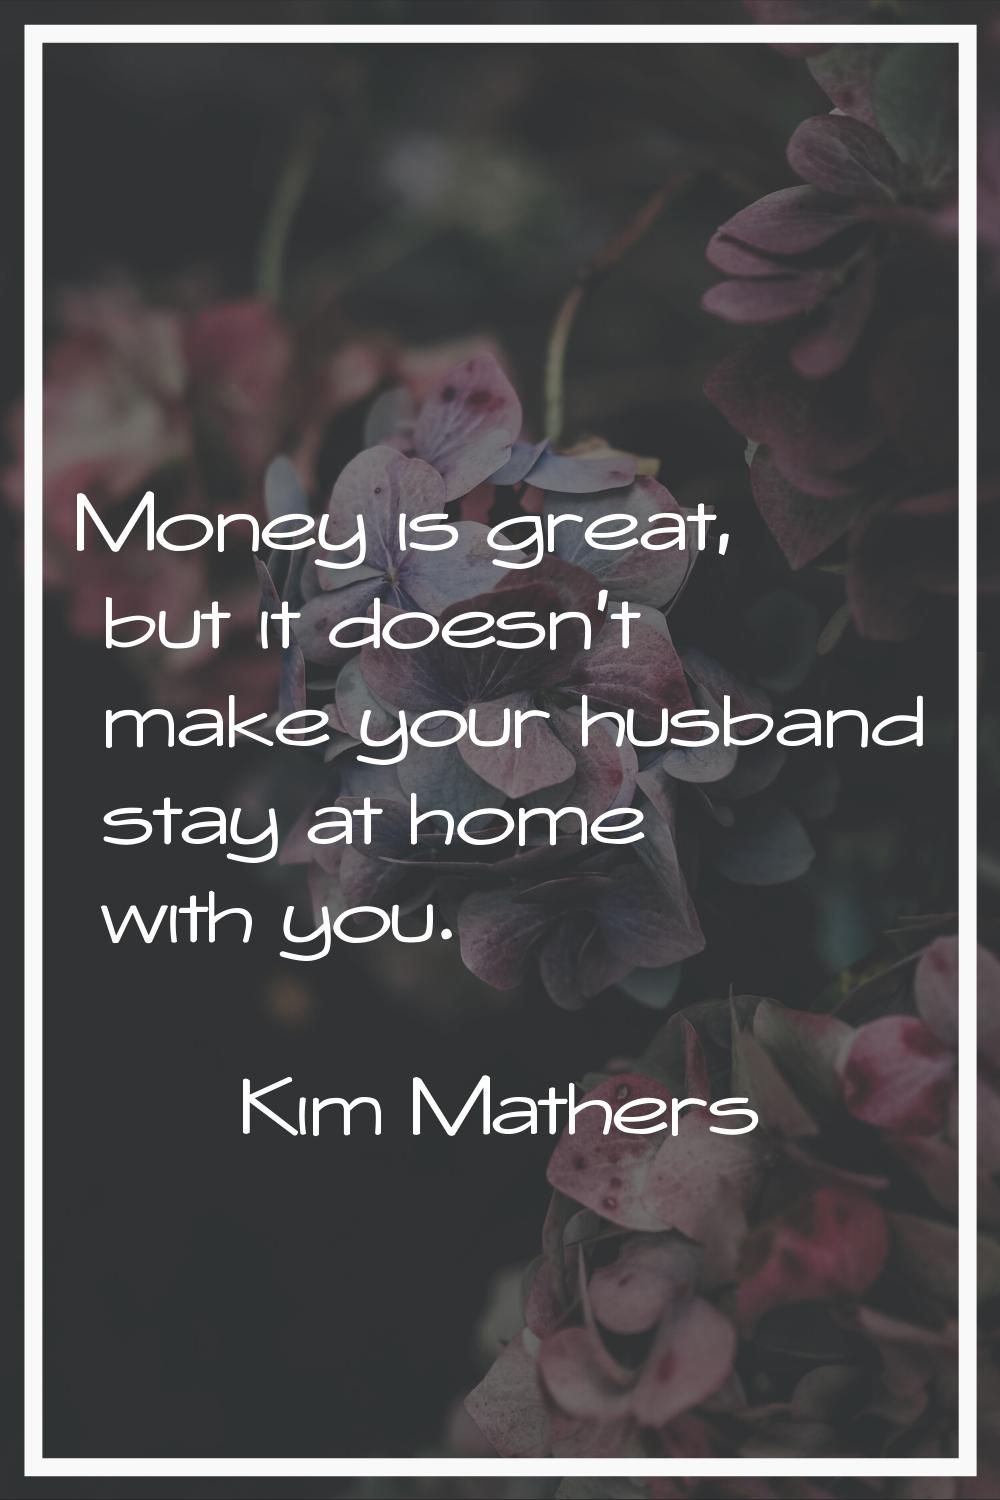 Money is great, but it doesn't make your husband stay at home with you.